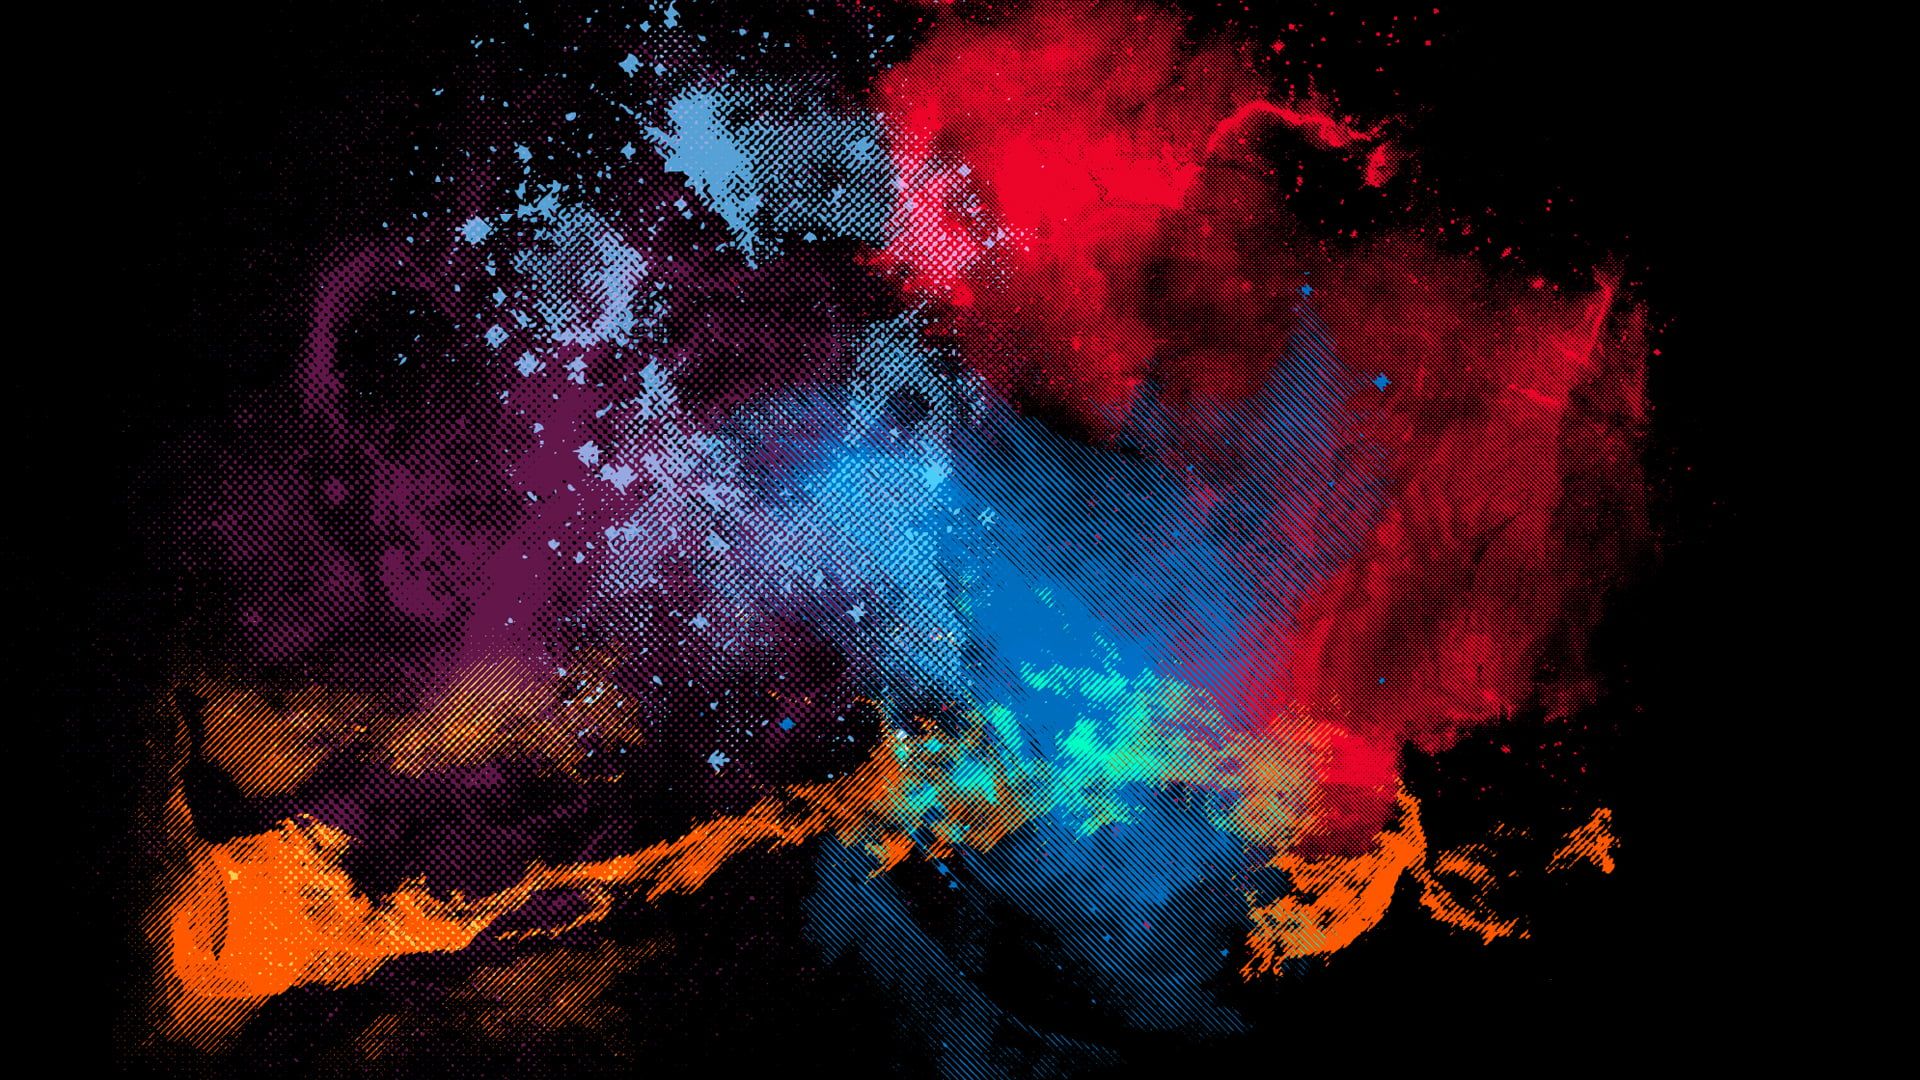 Abstract Black Artwork Wallpapers